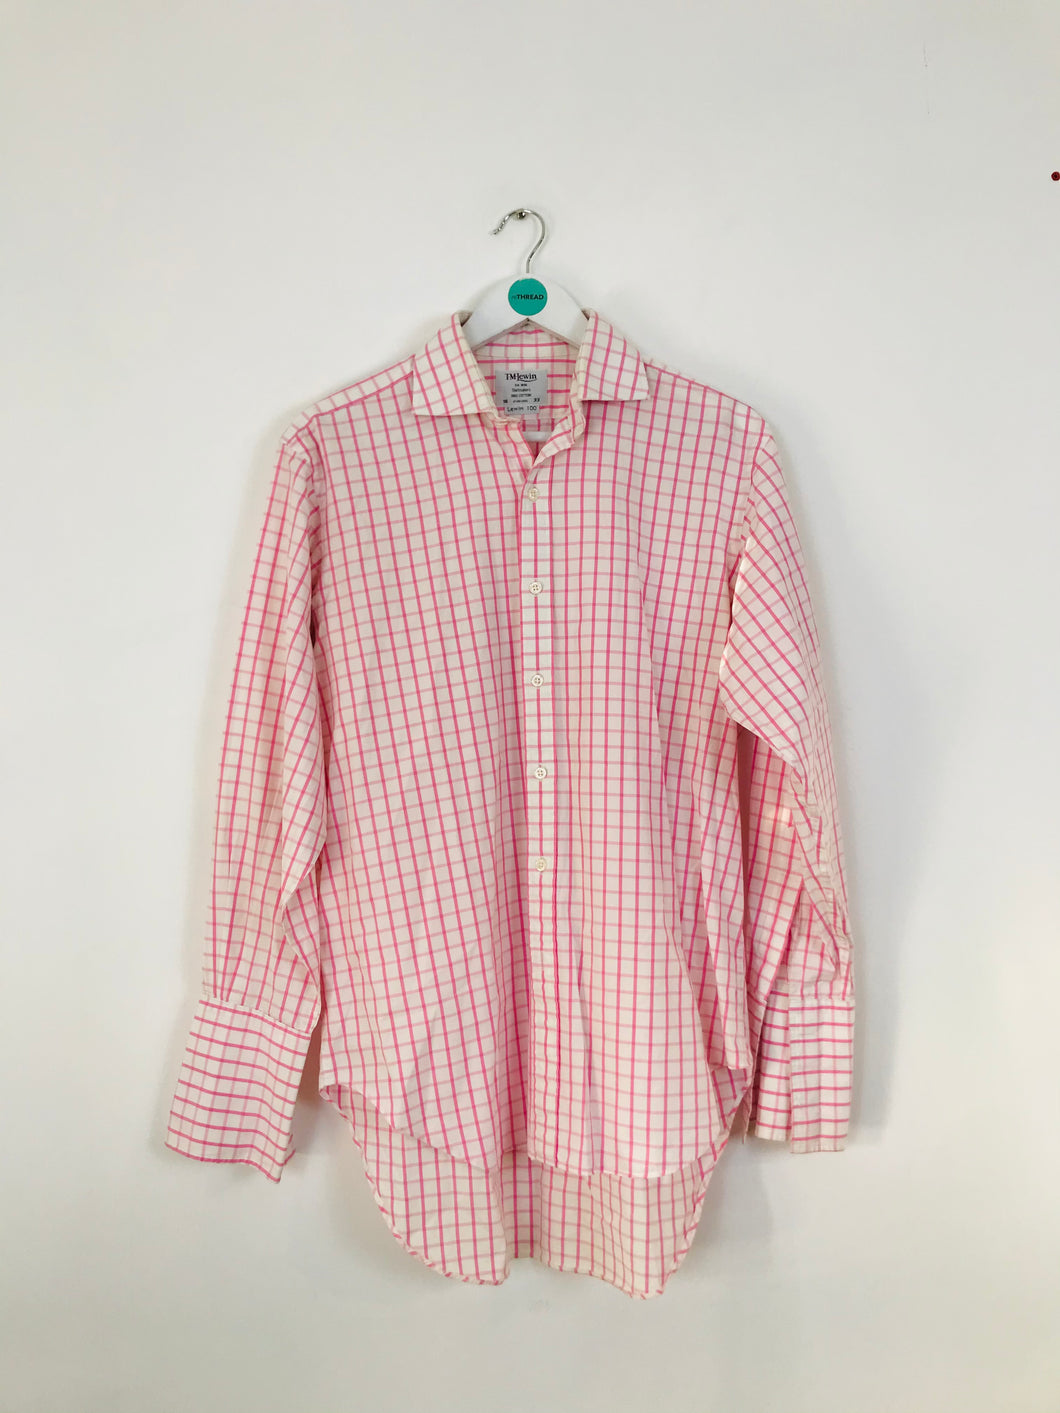 T.M.Lewin Men’s Button Up Checked Shirt | 16 M | Pink